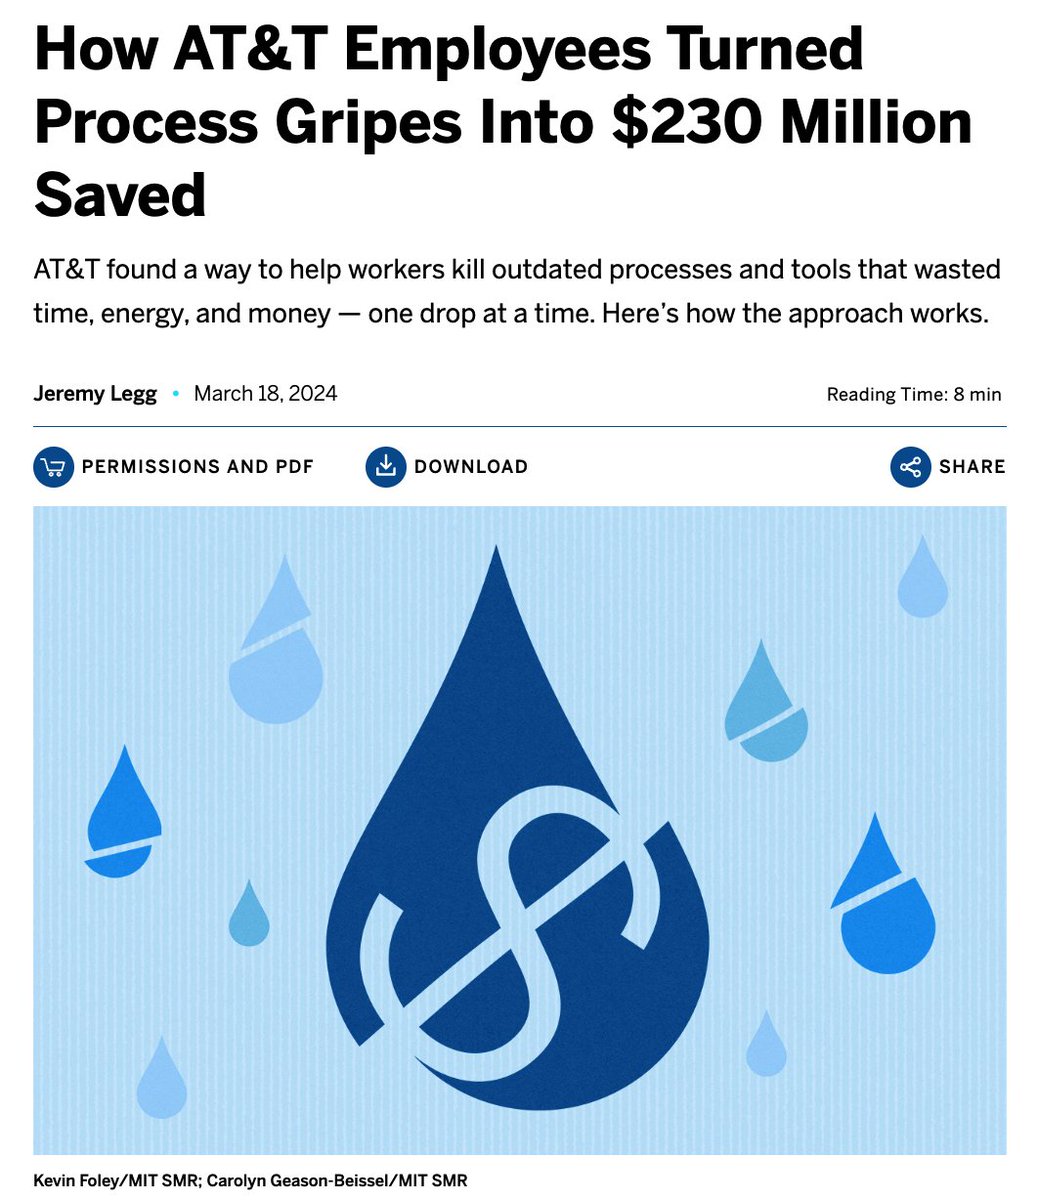 How AT&T Employees Turned Process Gripes Into $230 Million Saved ow.ly/BbWY50QYqRF

#Culture #Strategy #EmployeeListening